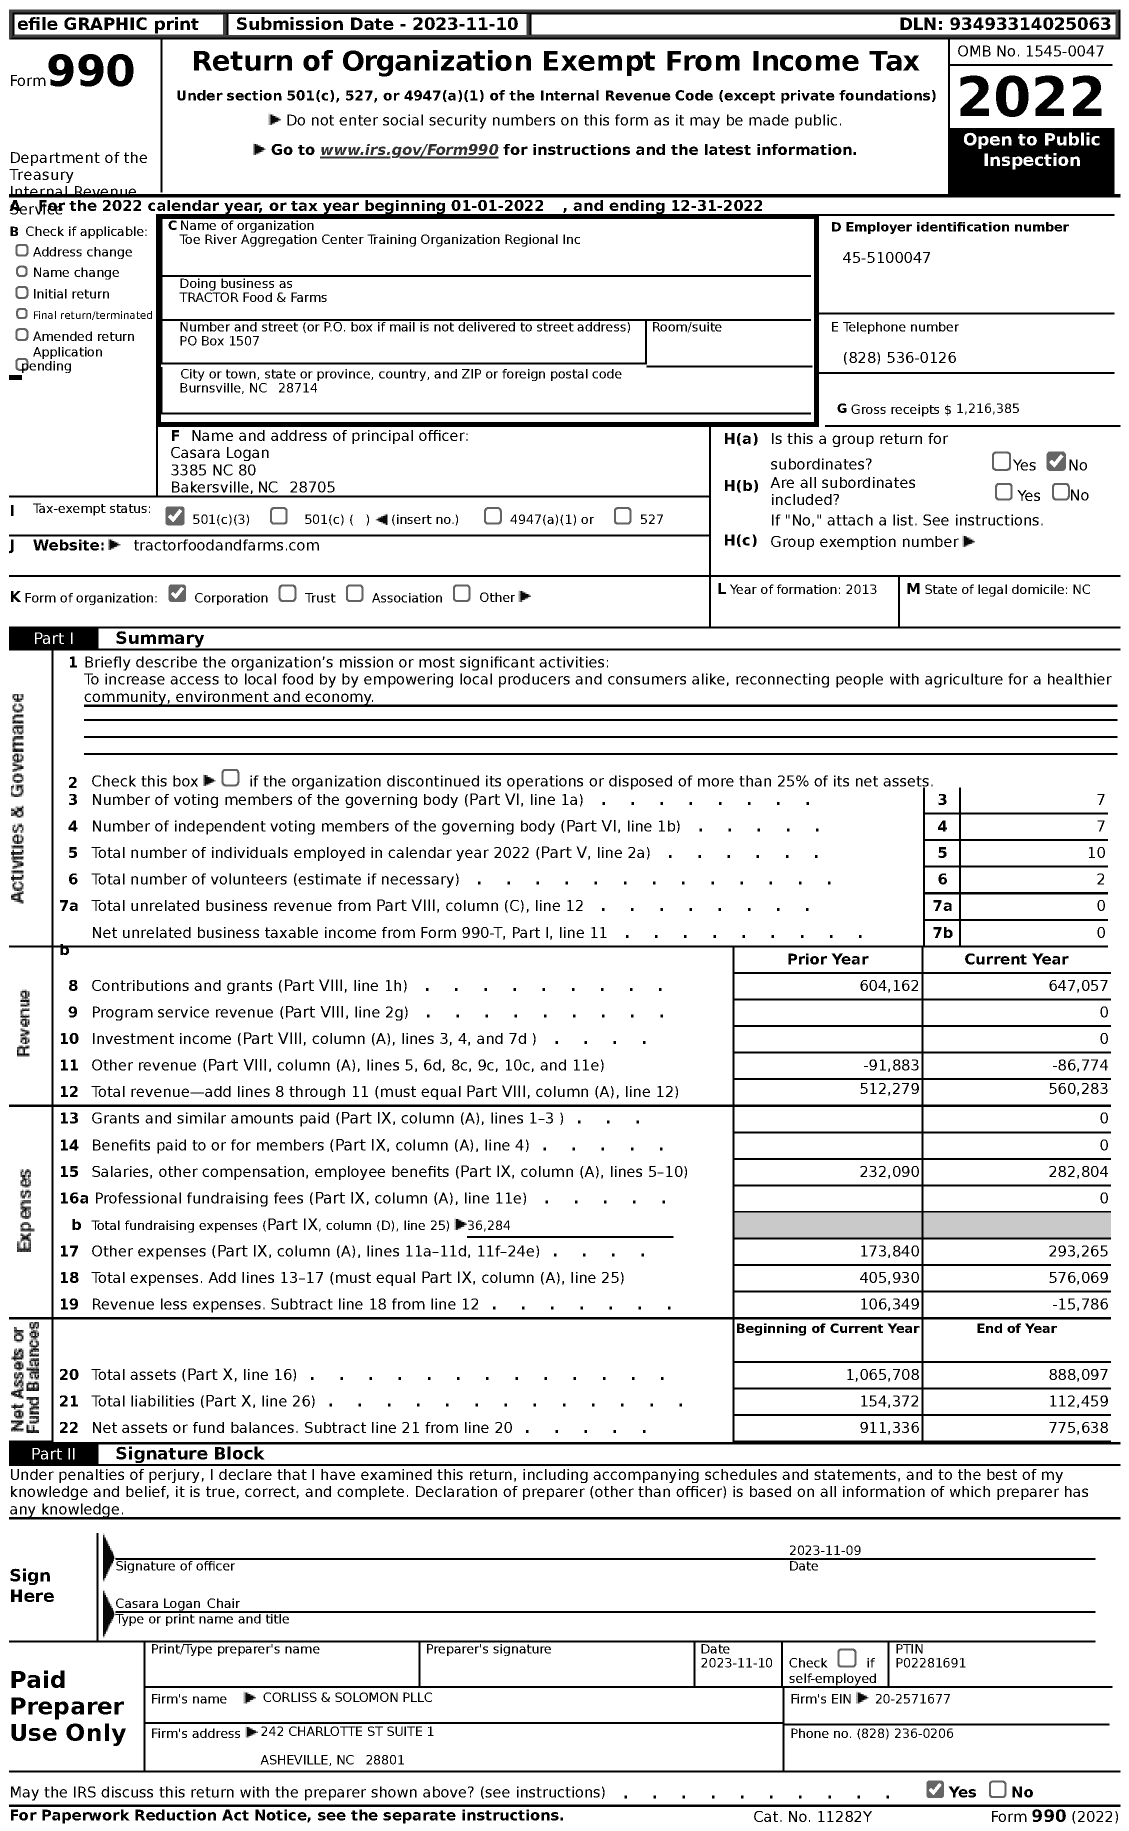 Image of first page of 2022 Form 990 for TRACTOR Food & Farms